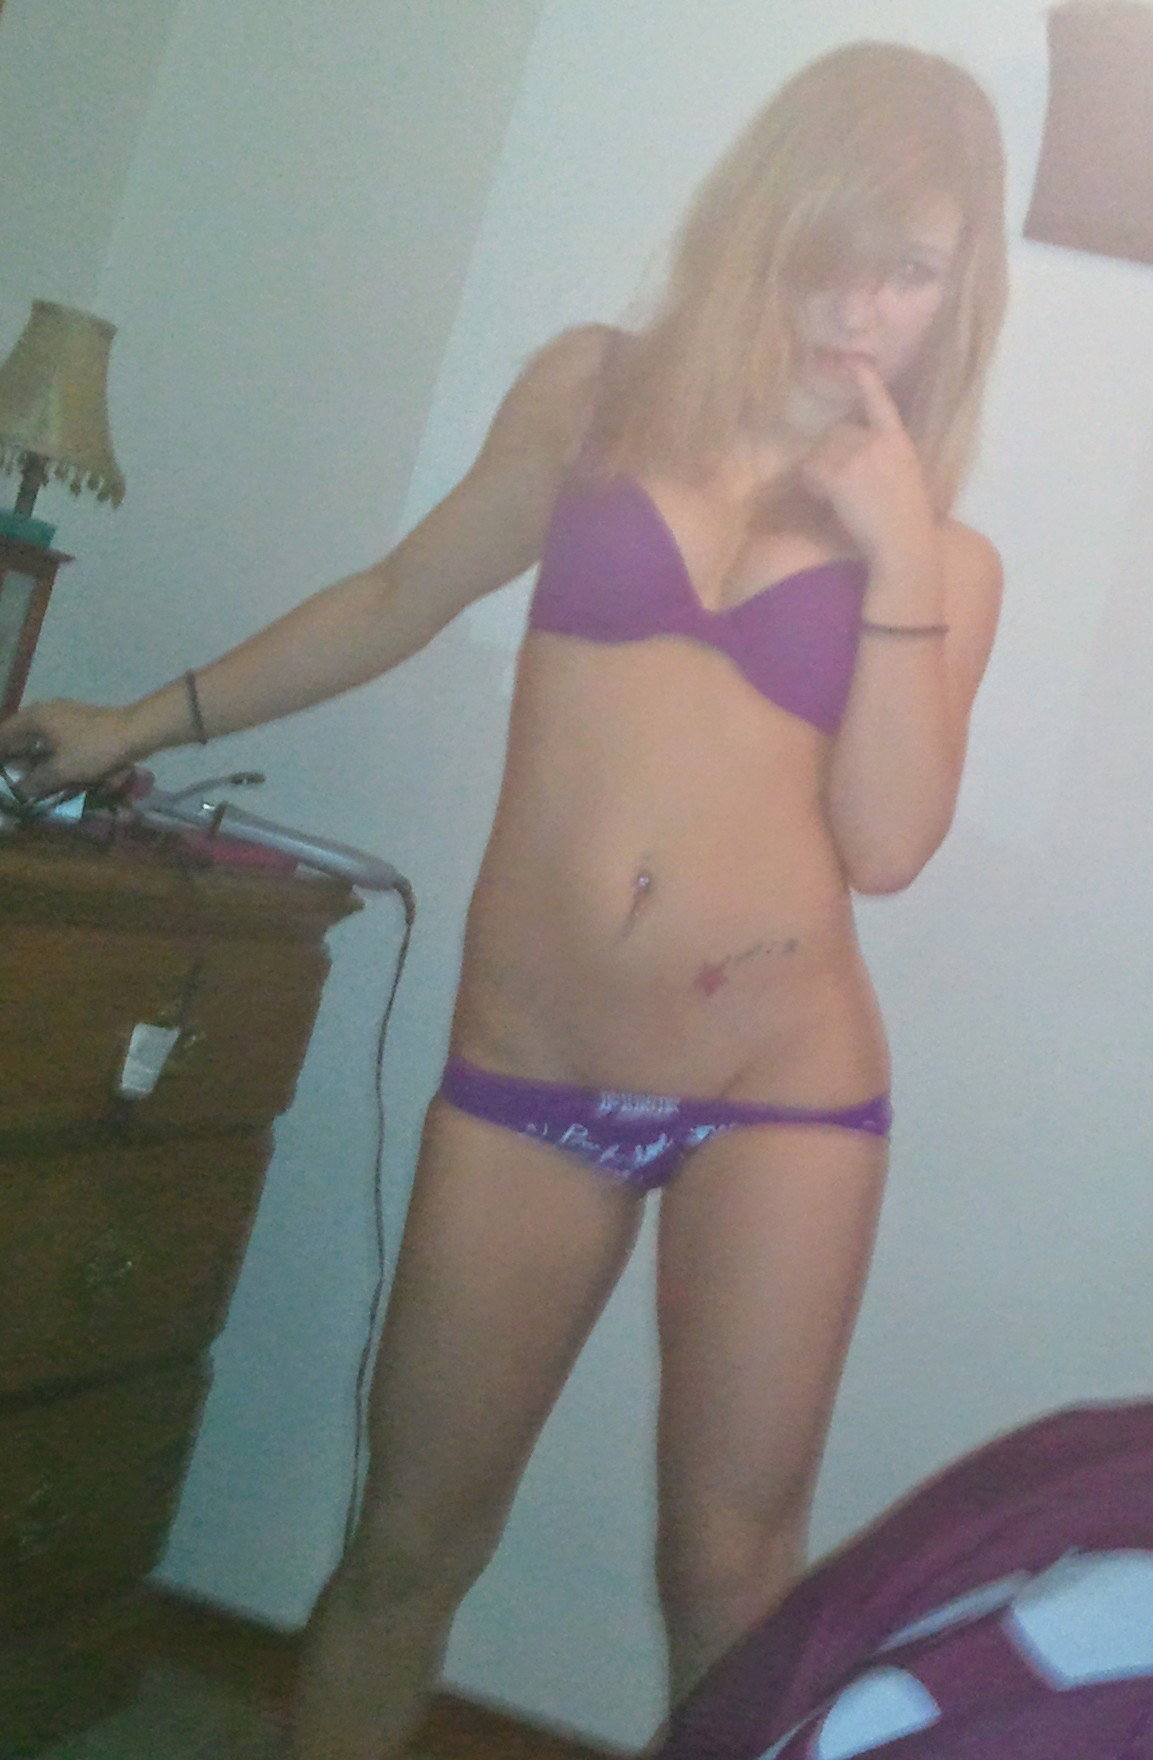 Watch the Photo by Brucey55 with the username @Brucey55, posted on August 15, 2020. The post is about the topic Amateurs. and the text says '#petite #exposed #sexy #slut #panties'